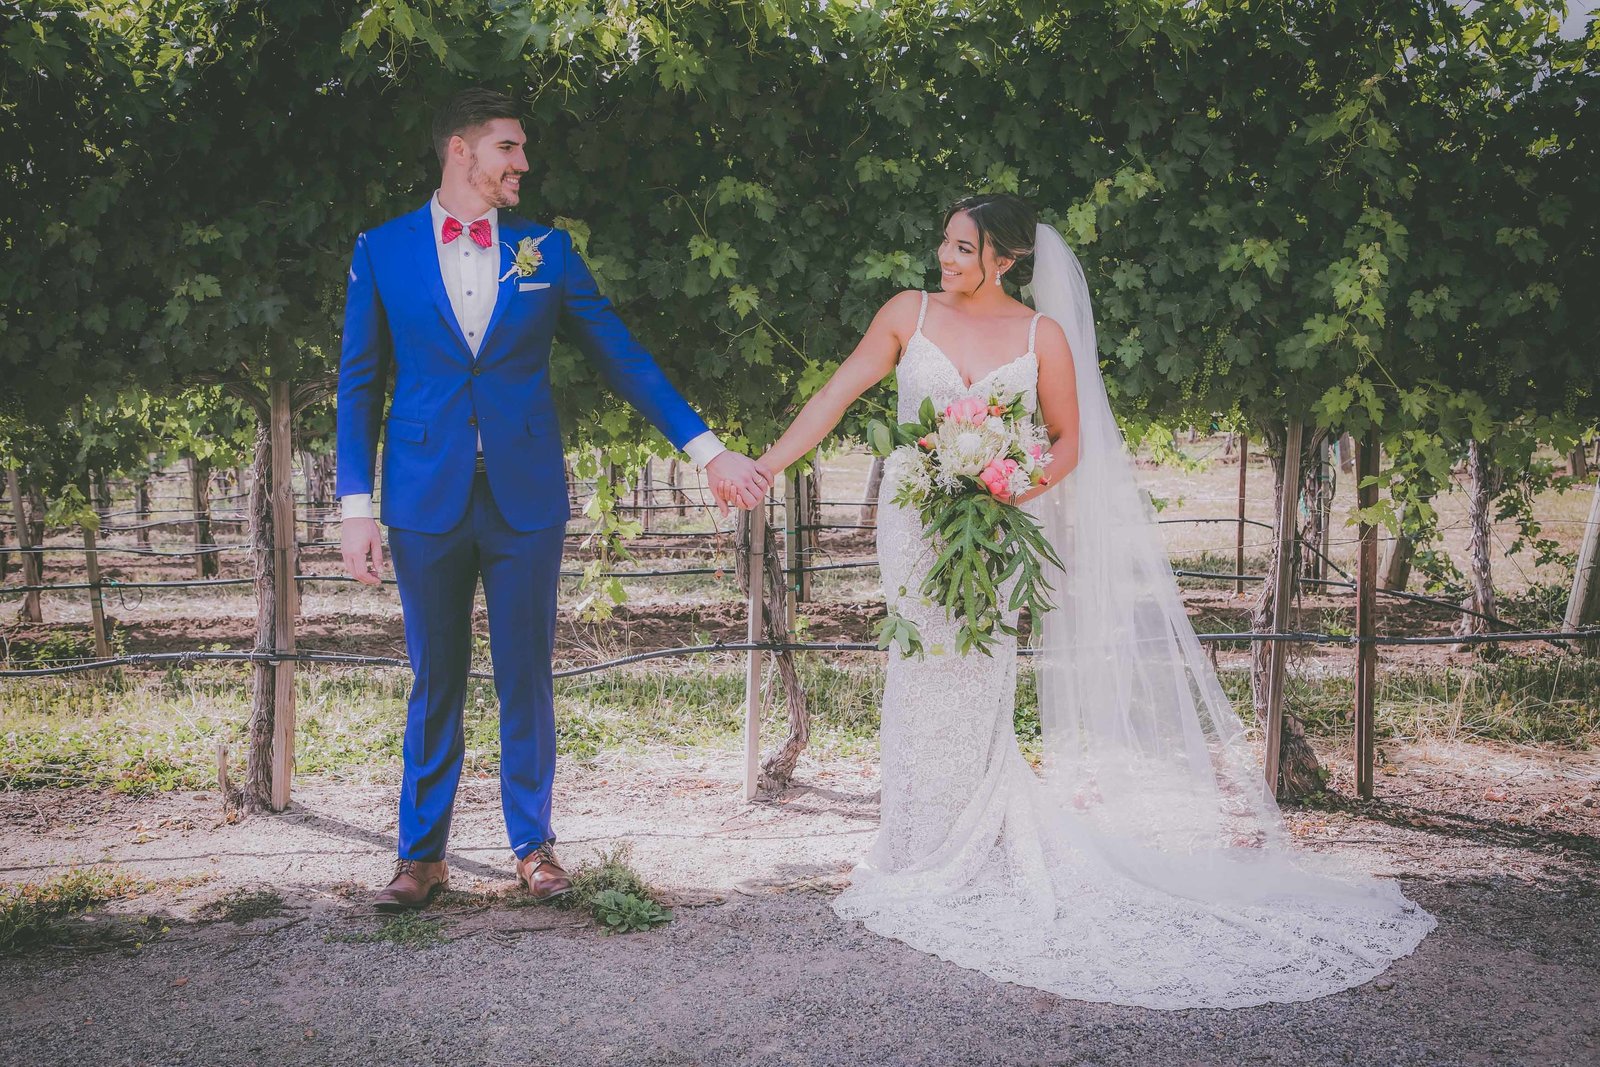 Groom and bride look and smile at each other while holding hands in California vineyard.